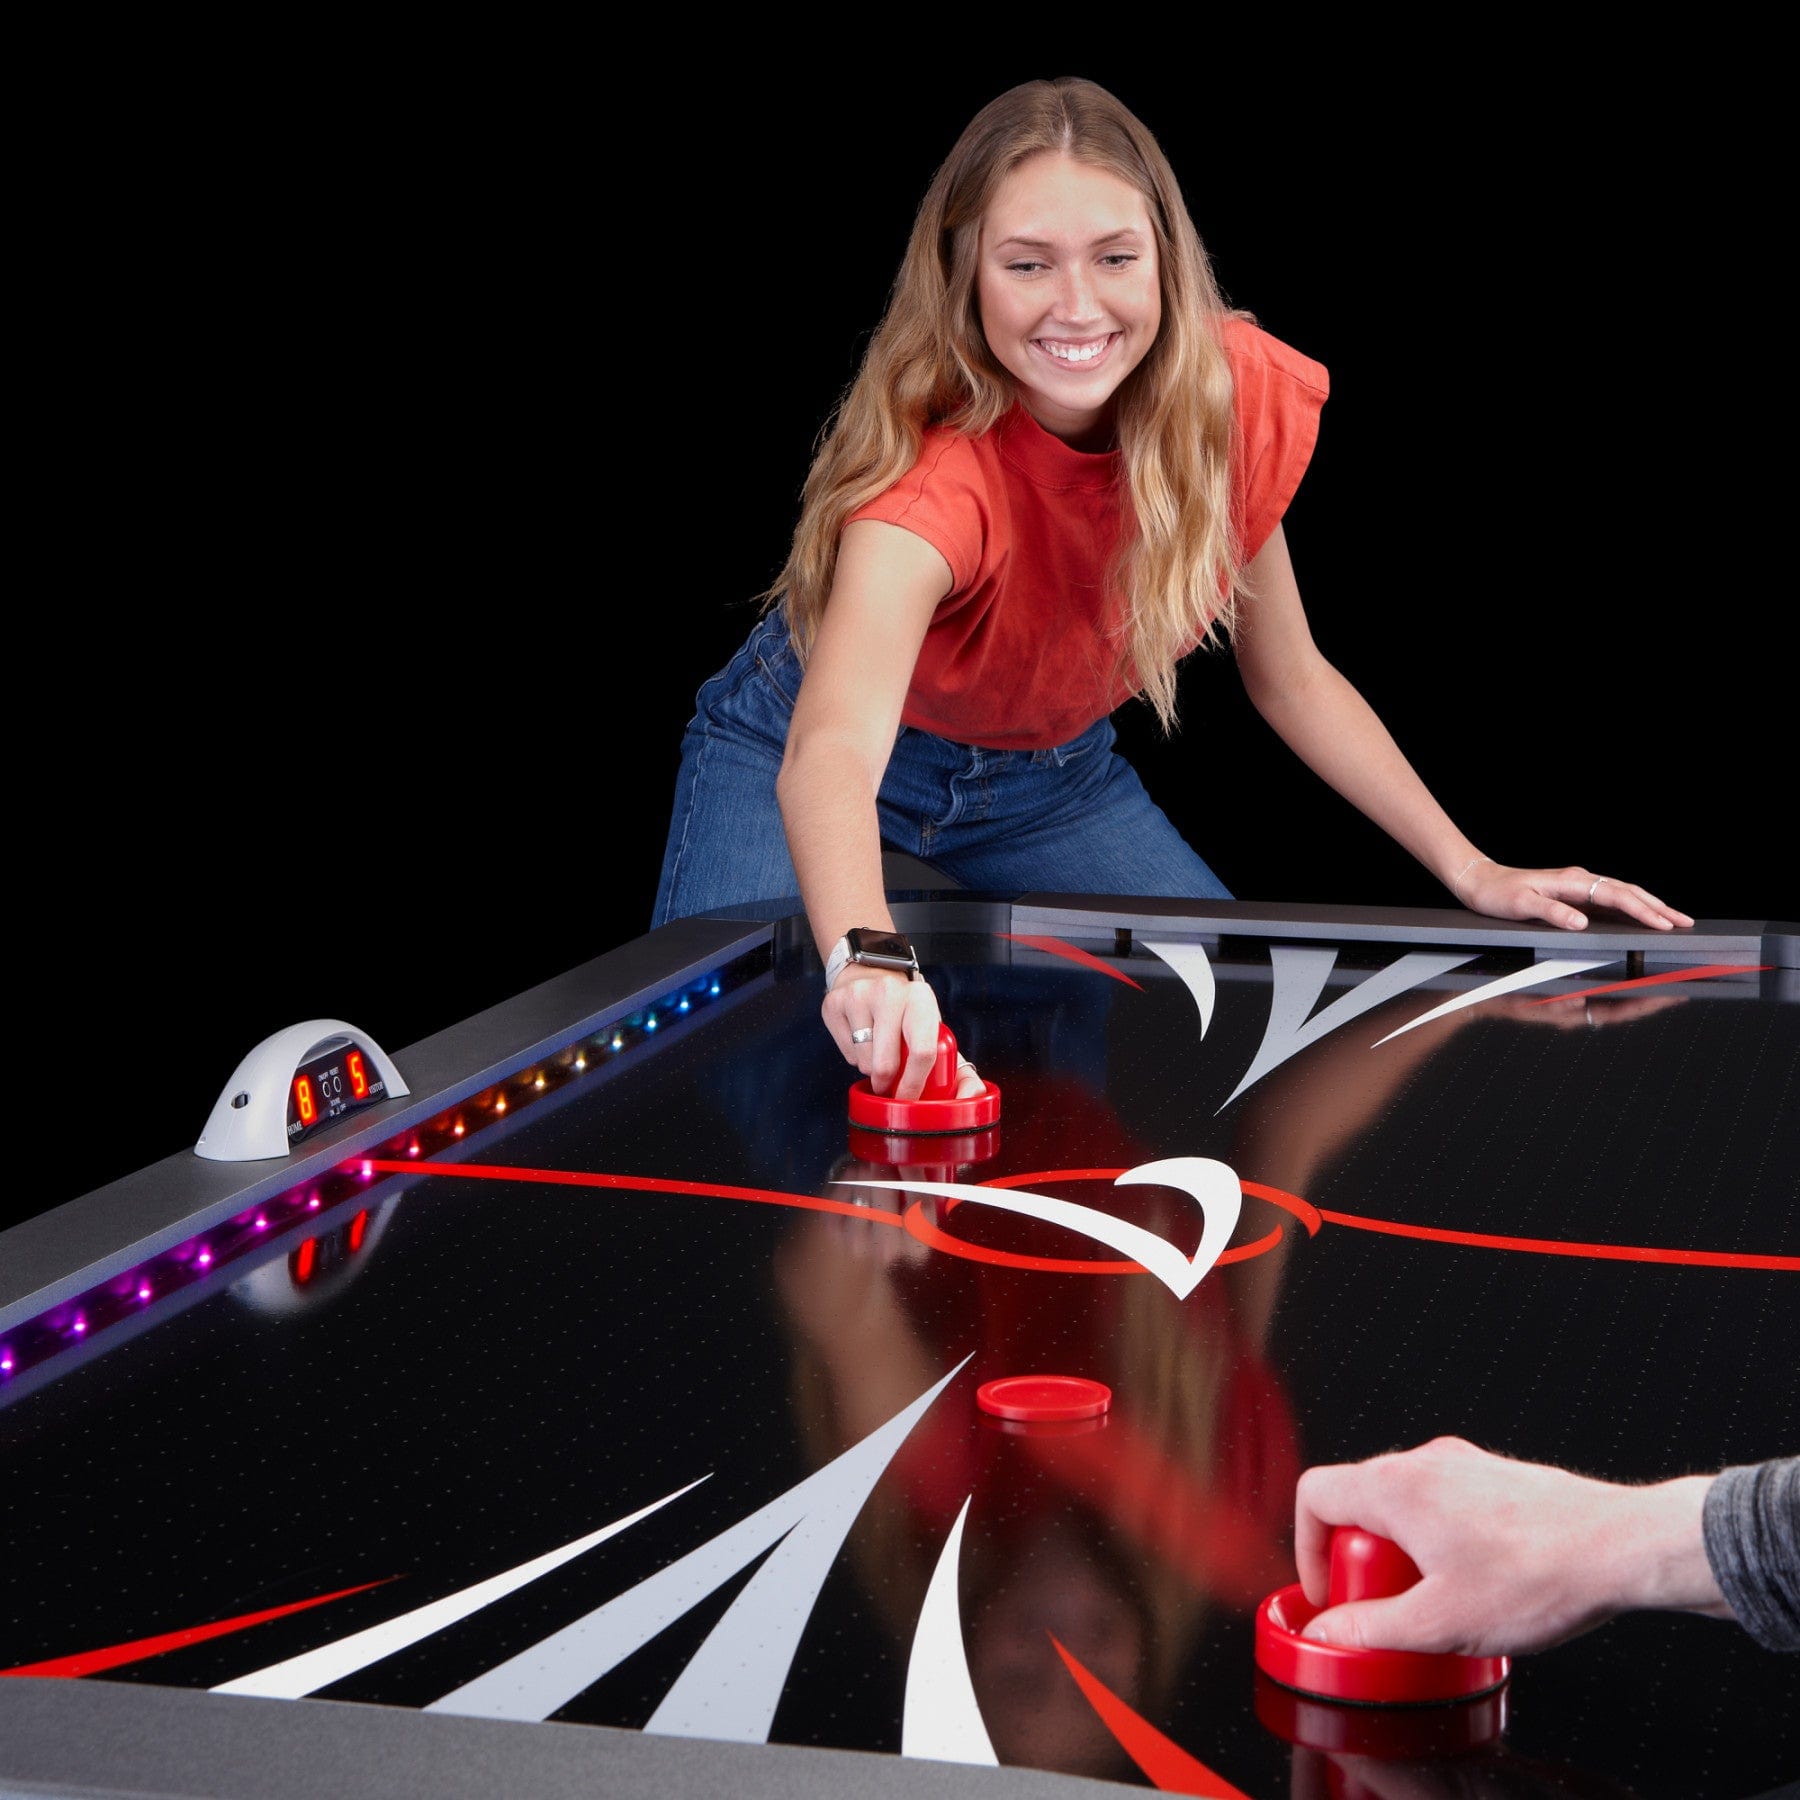 Fat Cat 64-3014  Volt LED Illuminated Air Hockey Table - Atomic Game Store